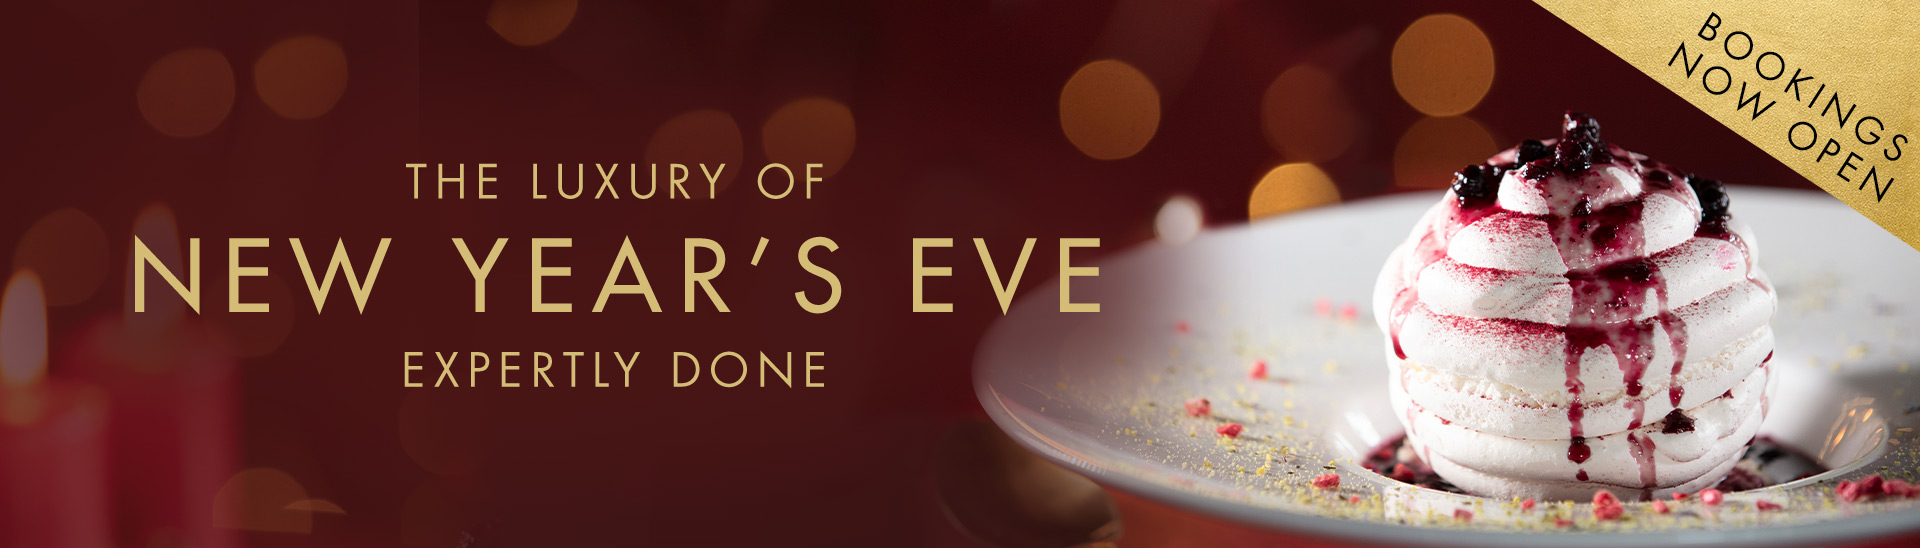 New Year’s Eve Menu at Miller & Carter Cardiff Bay • Book Now